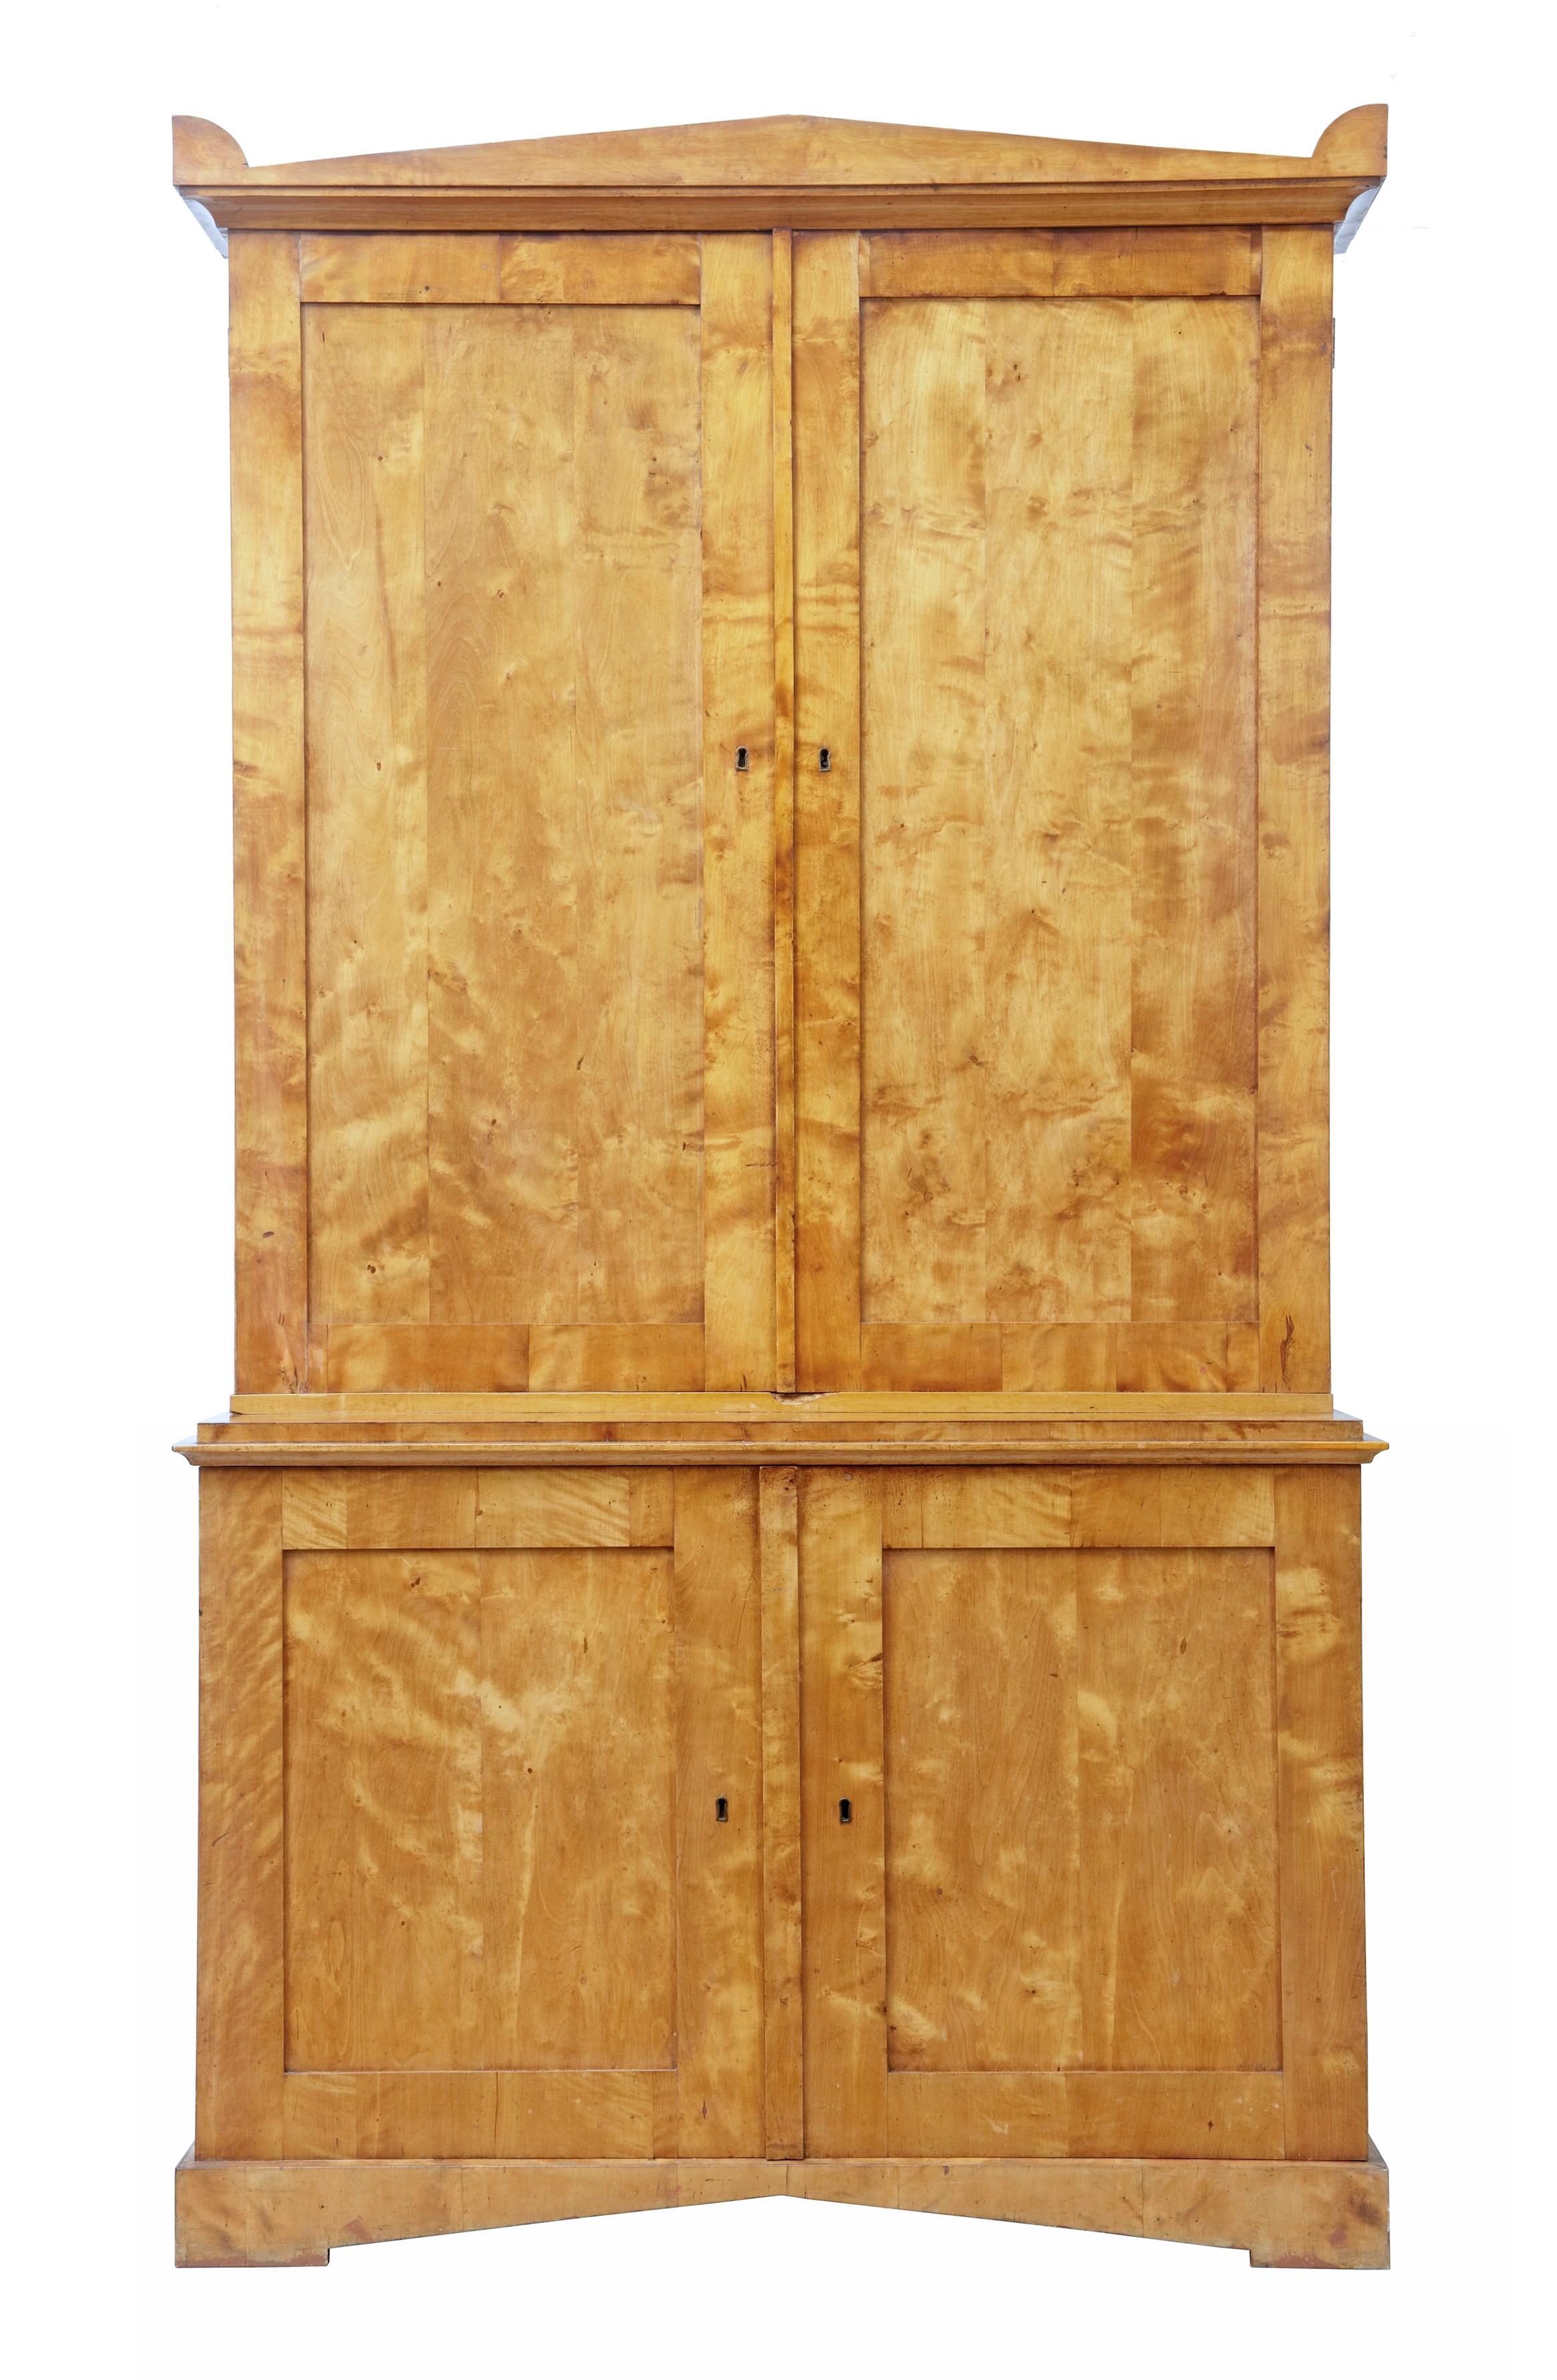 Fine quality Swedish 19th century birch cabinet circa 1870.

Good quality architectural birch cabinet from the mid-19th century. Cabinet comprises of 2 parts with rich quarter sawn veneers used. Shaped cornice with a double door cabinet below